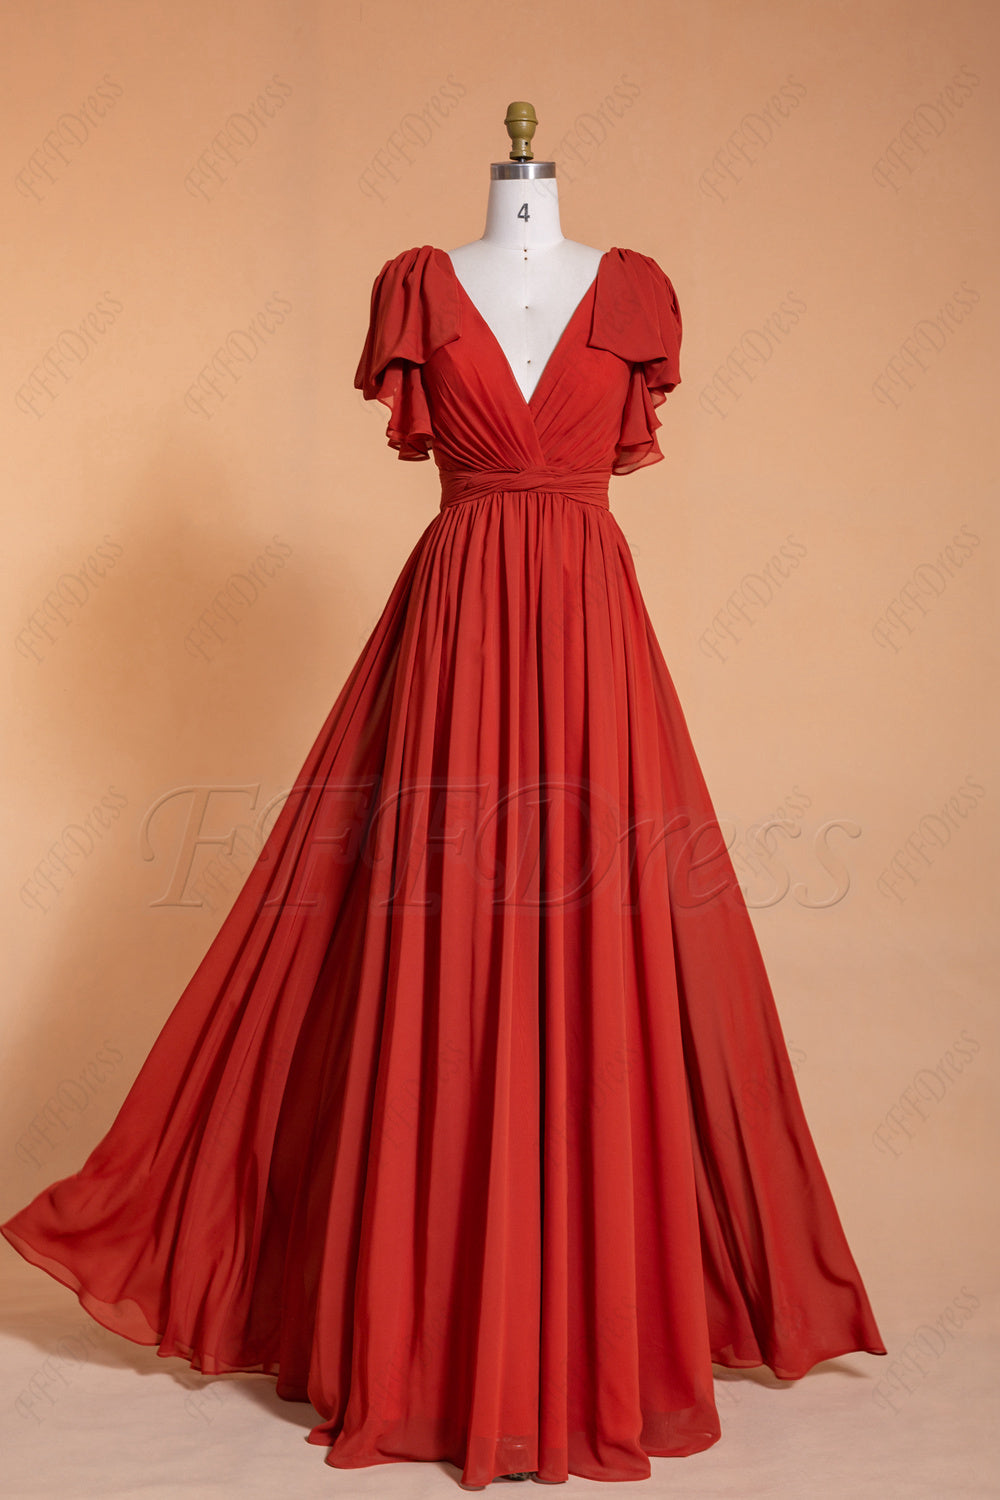 Rusted red modest long bridesmaid dresses